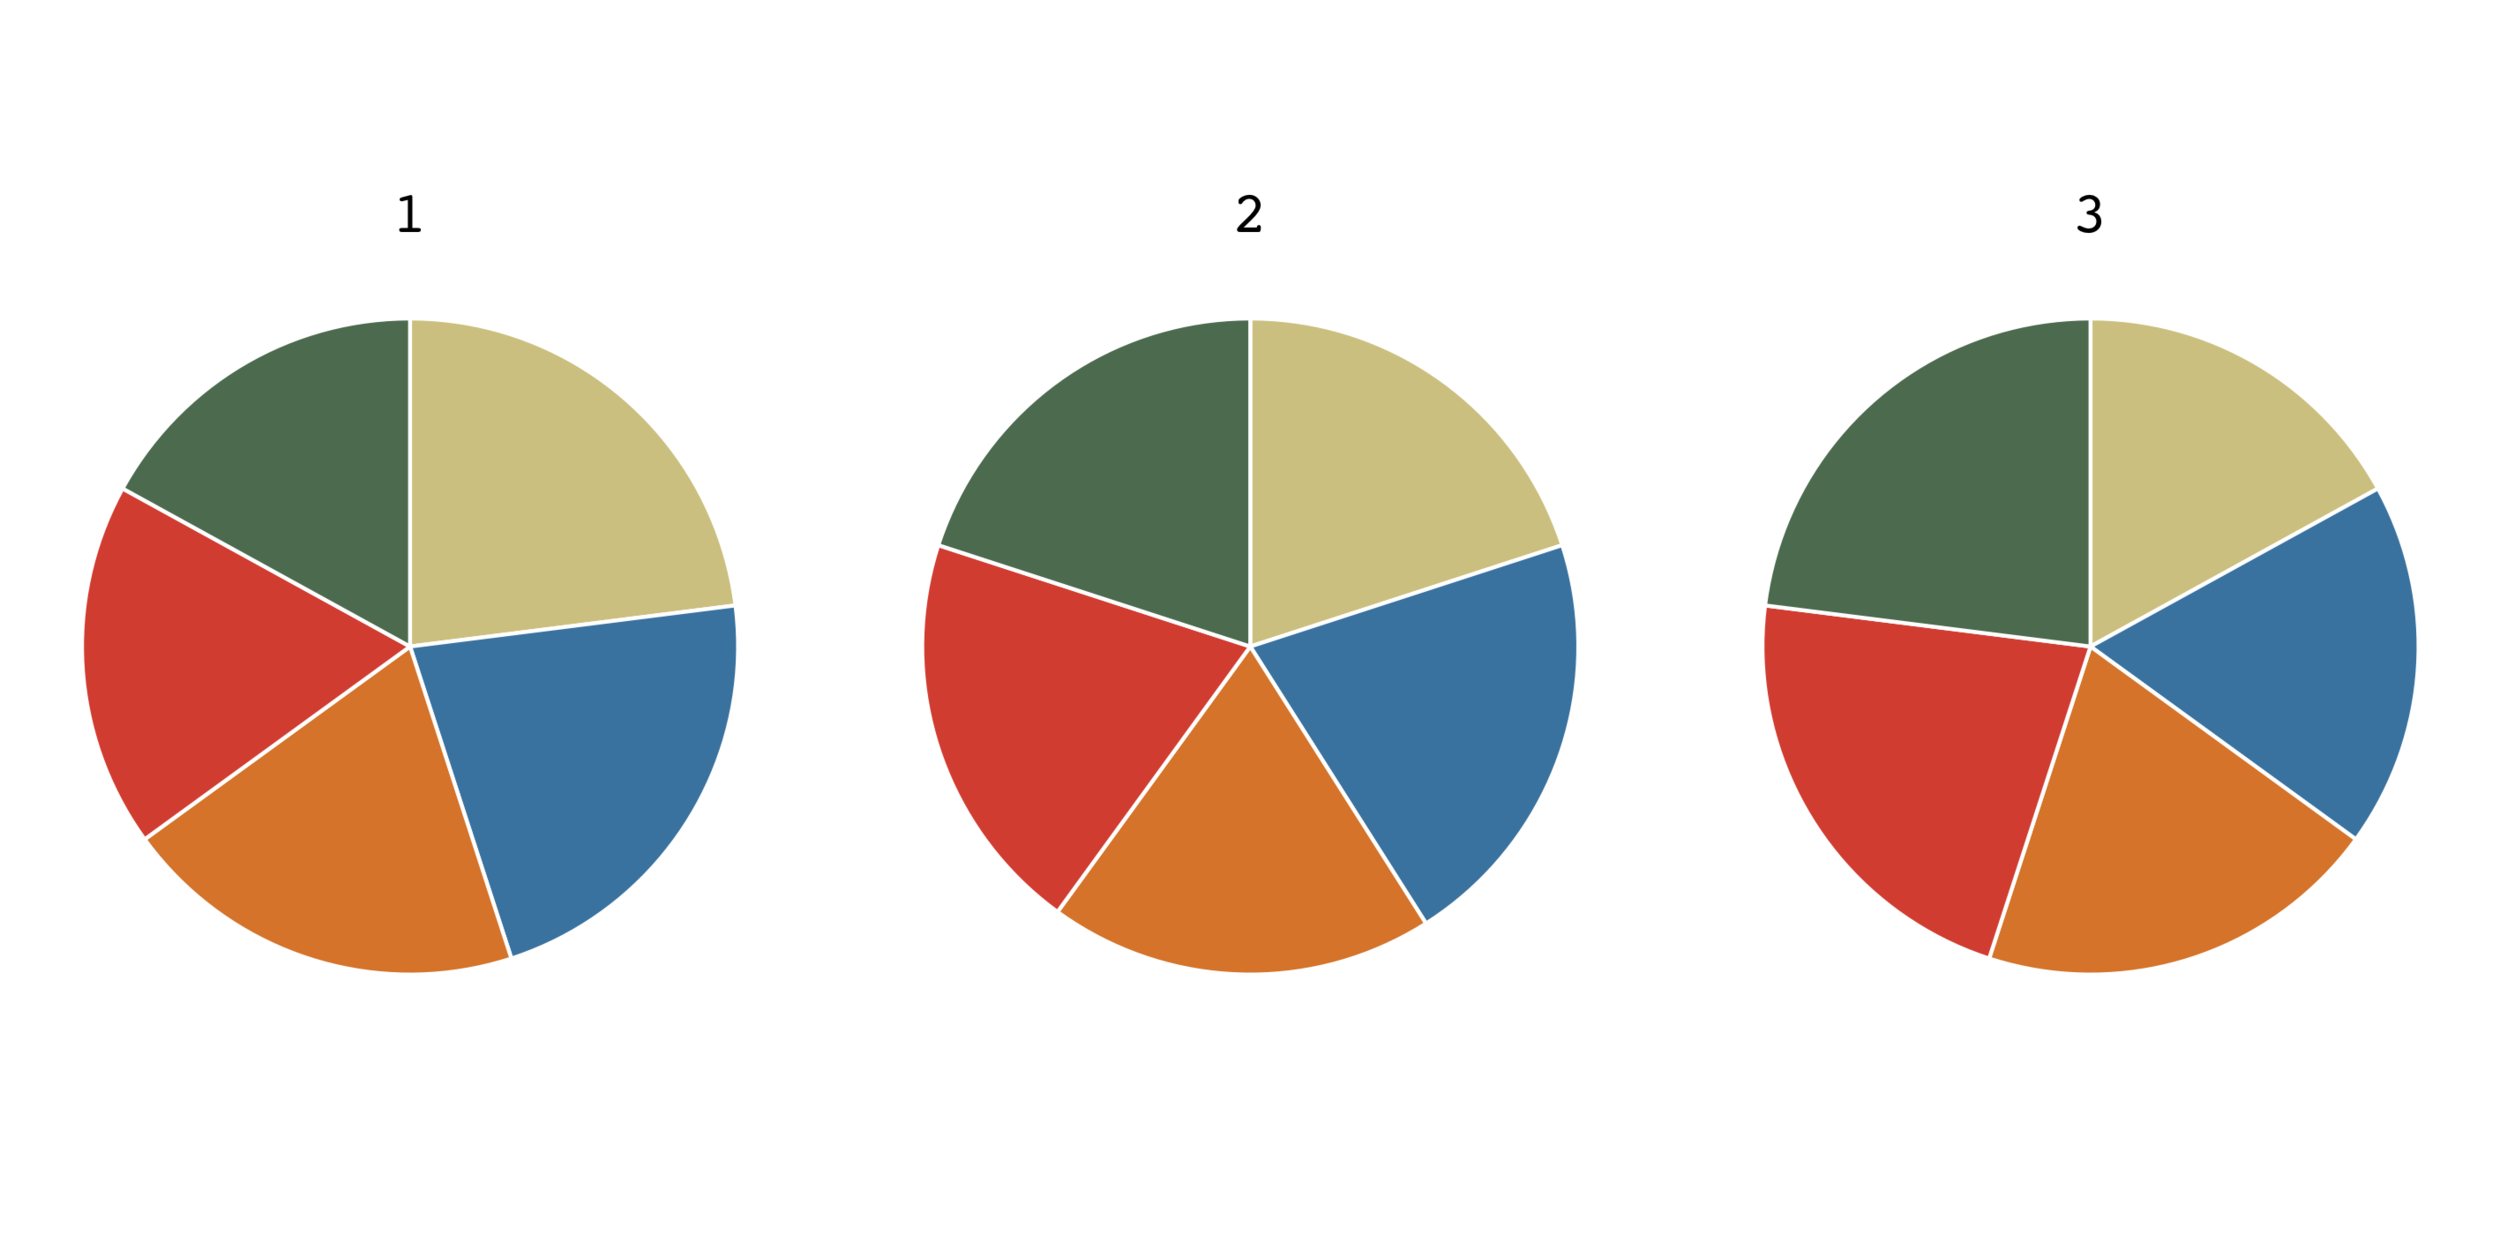 3 similar pie charts, with 5 slices each